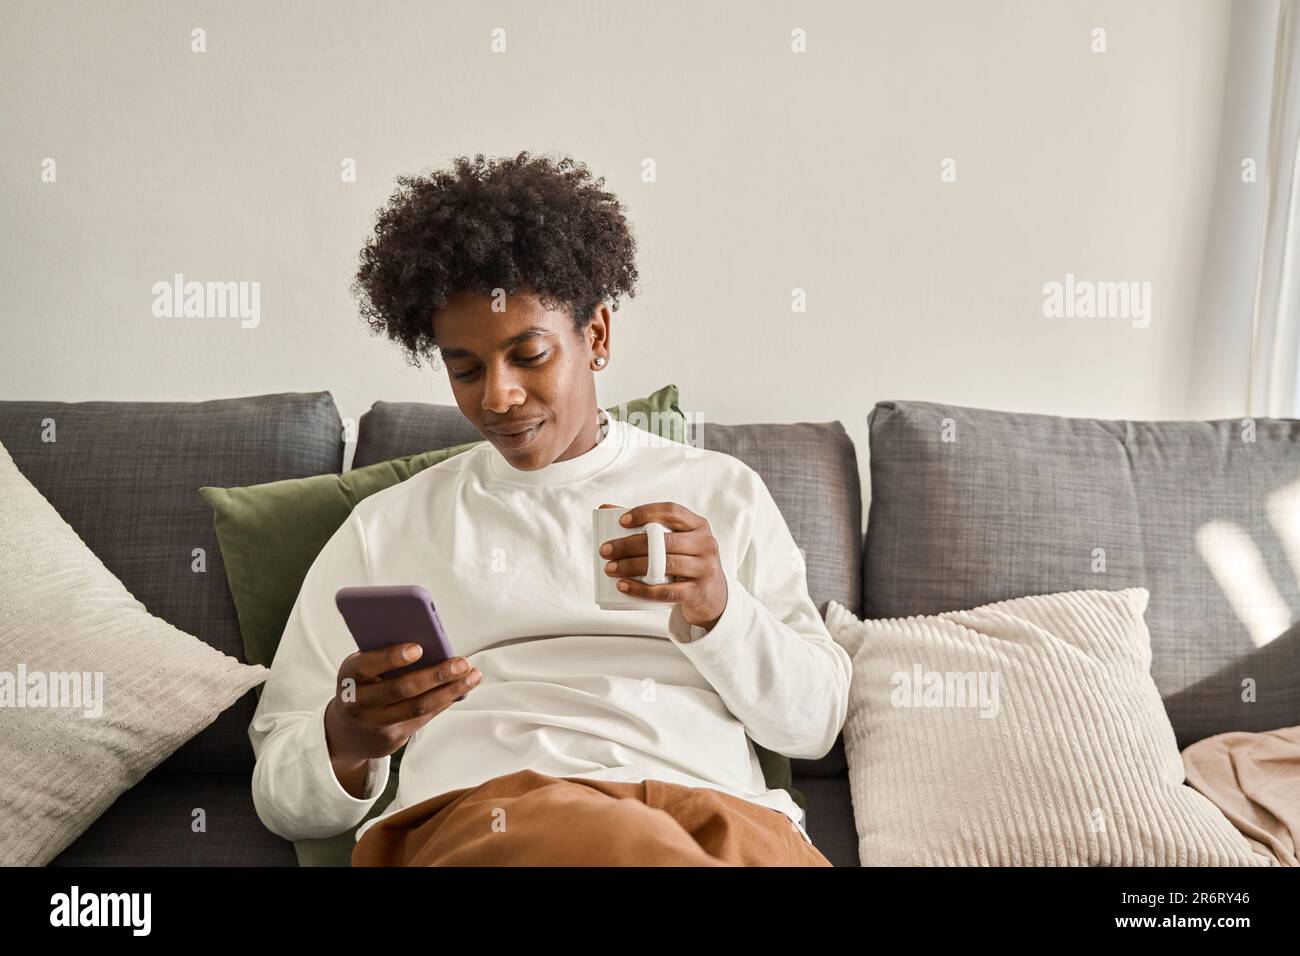 Relaxed calm gen z African American teen sitting on couch using phone. Stock Photo